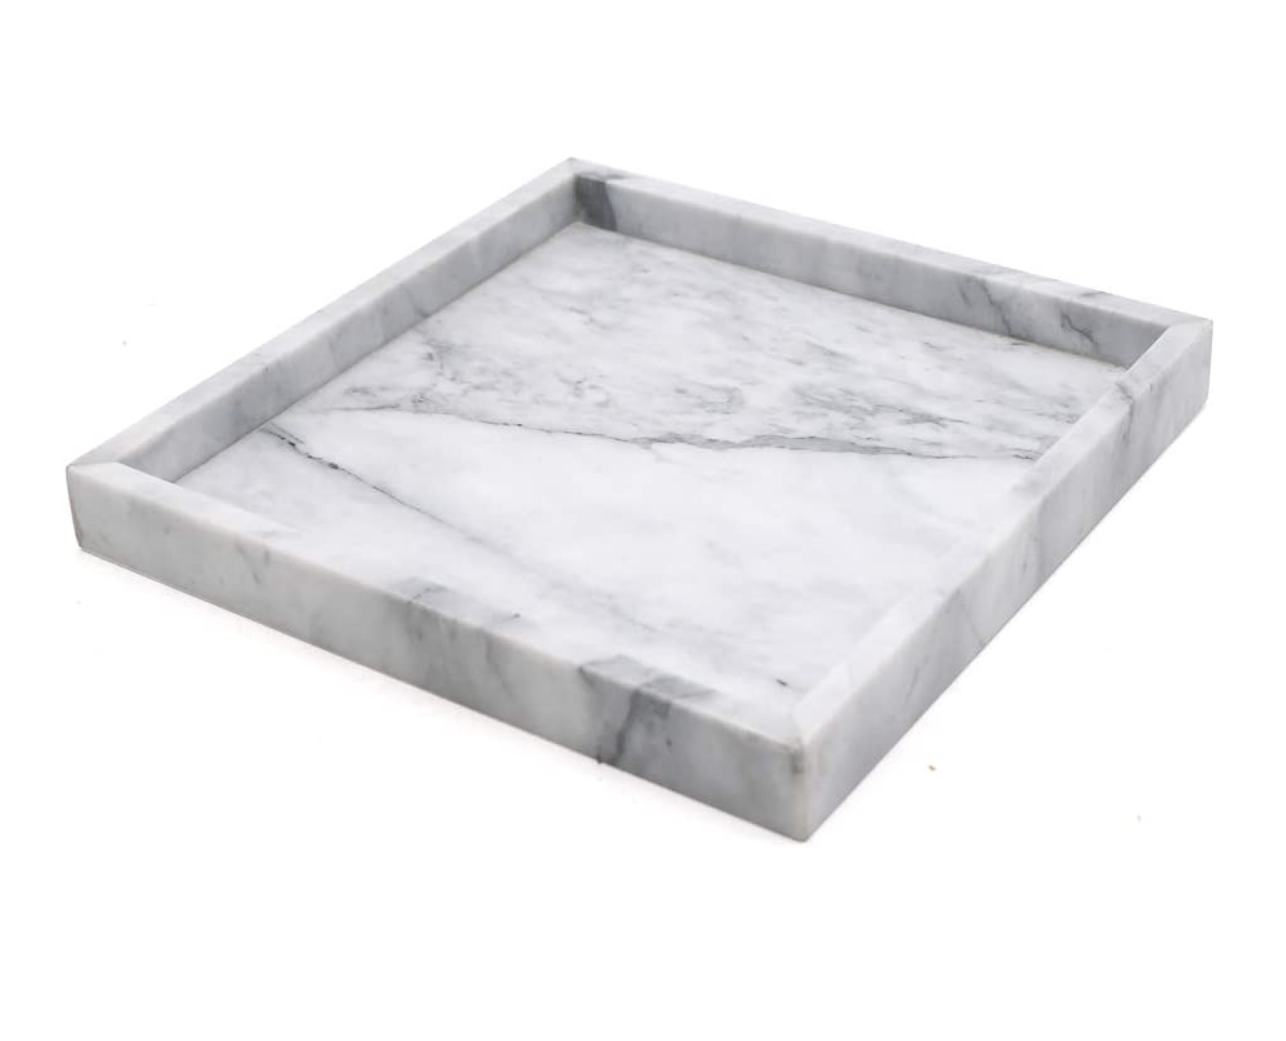 LUANT Marble Stone Decorative Tray for Counter, Vanity, Dresser, Nightstand, or Desk from Amazon